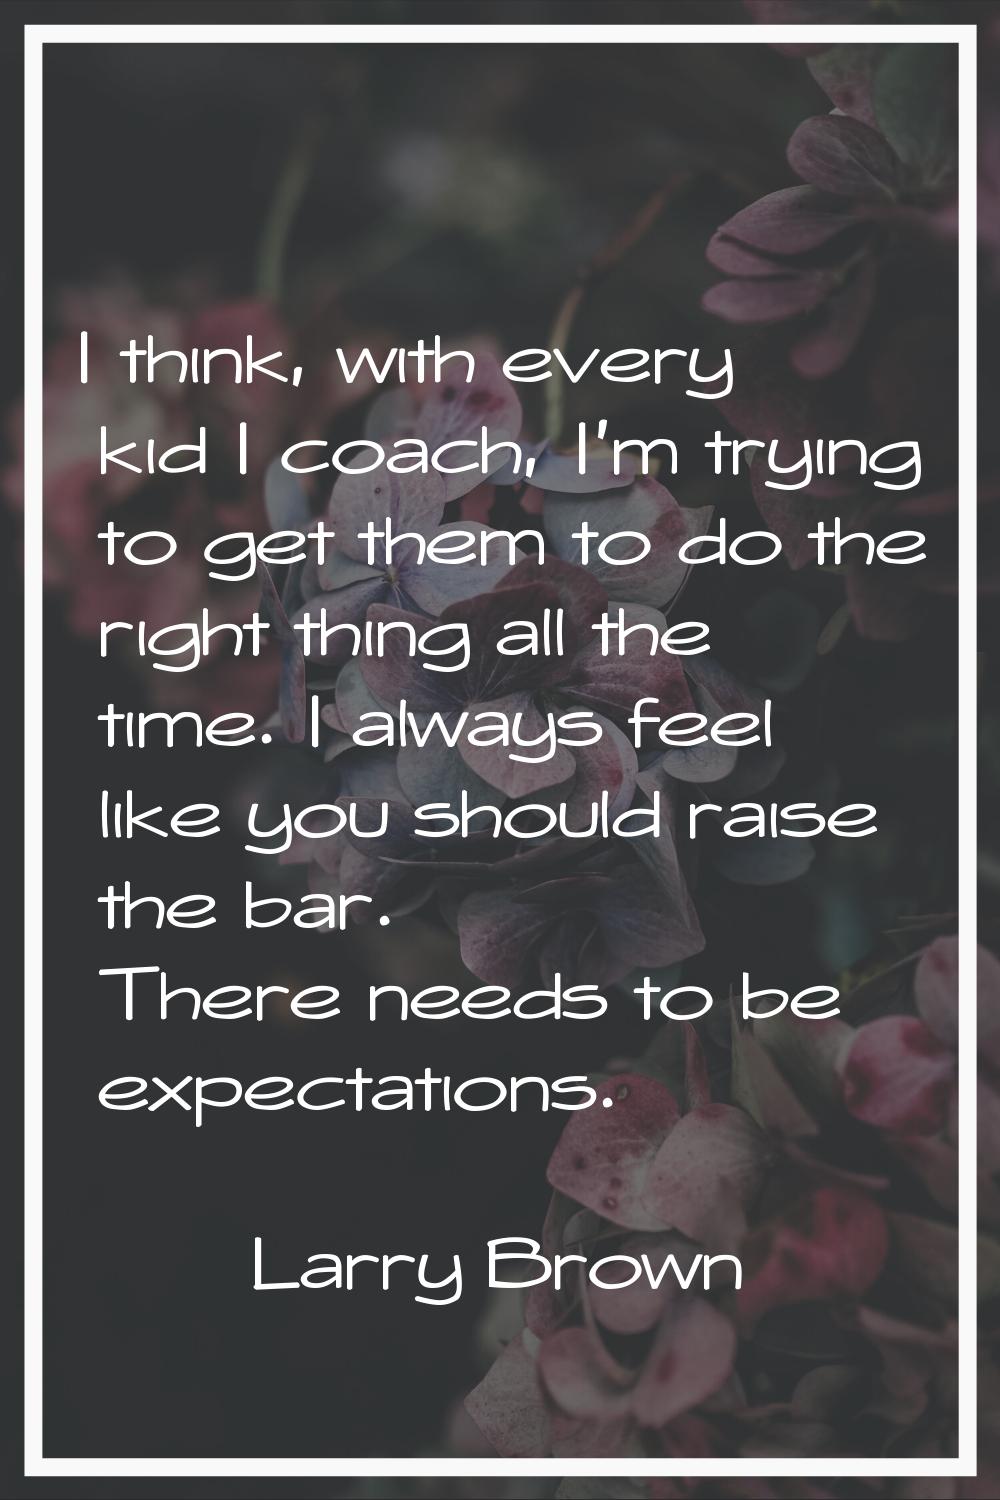 I think, with every kid I coach, I'm trying to get them to do the right thing all the time. I alway